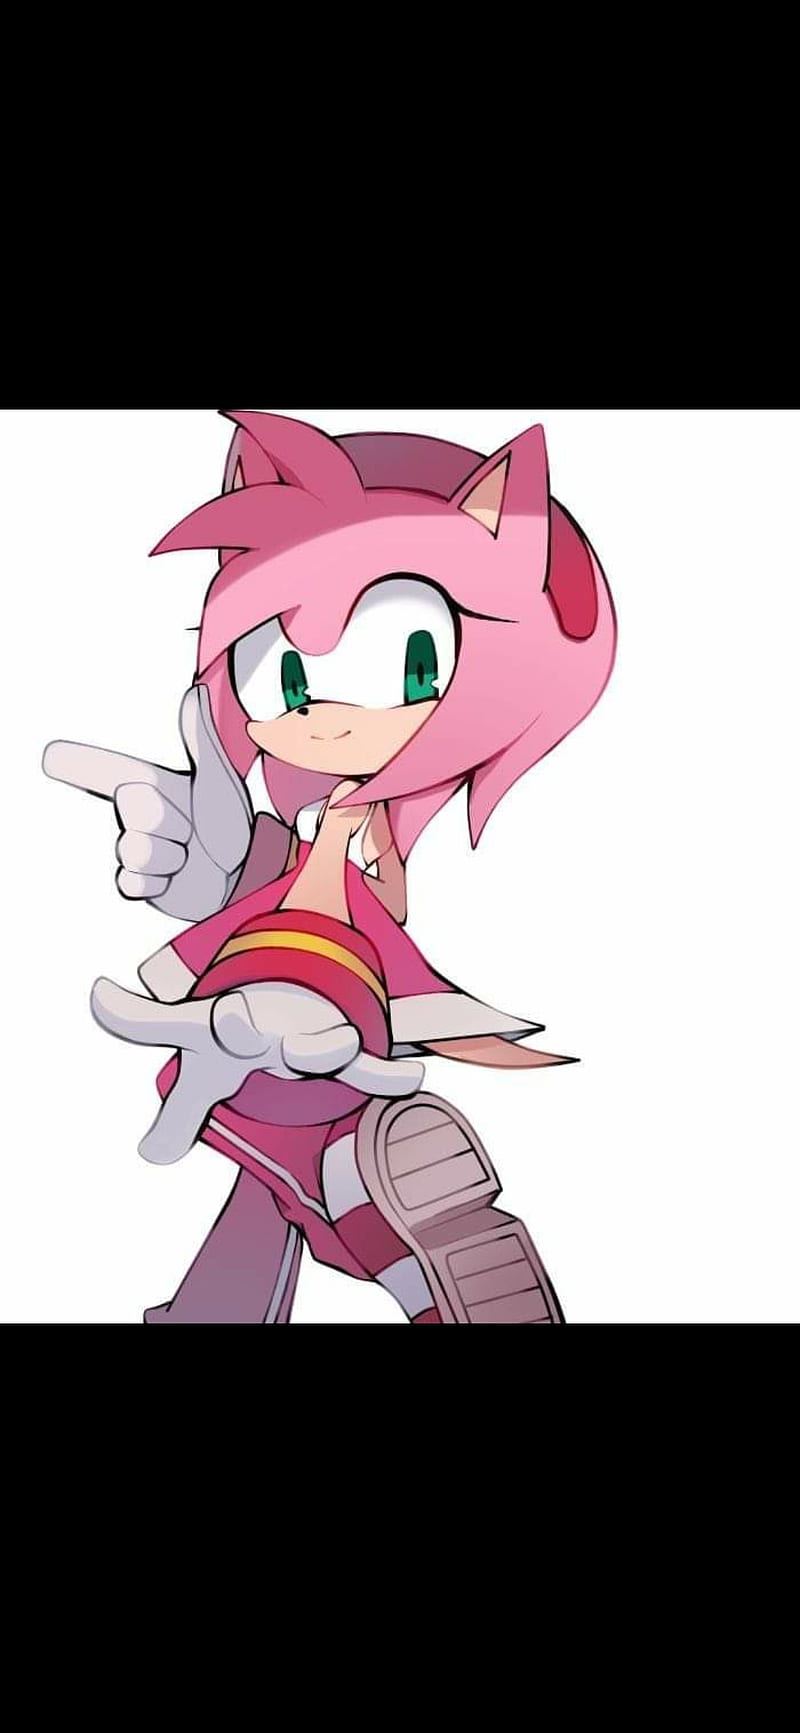 Amy Rose Free Riders Phone Wallpaper by SuperTikalSisters on DeviantArt